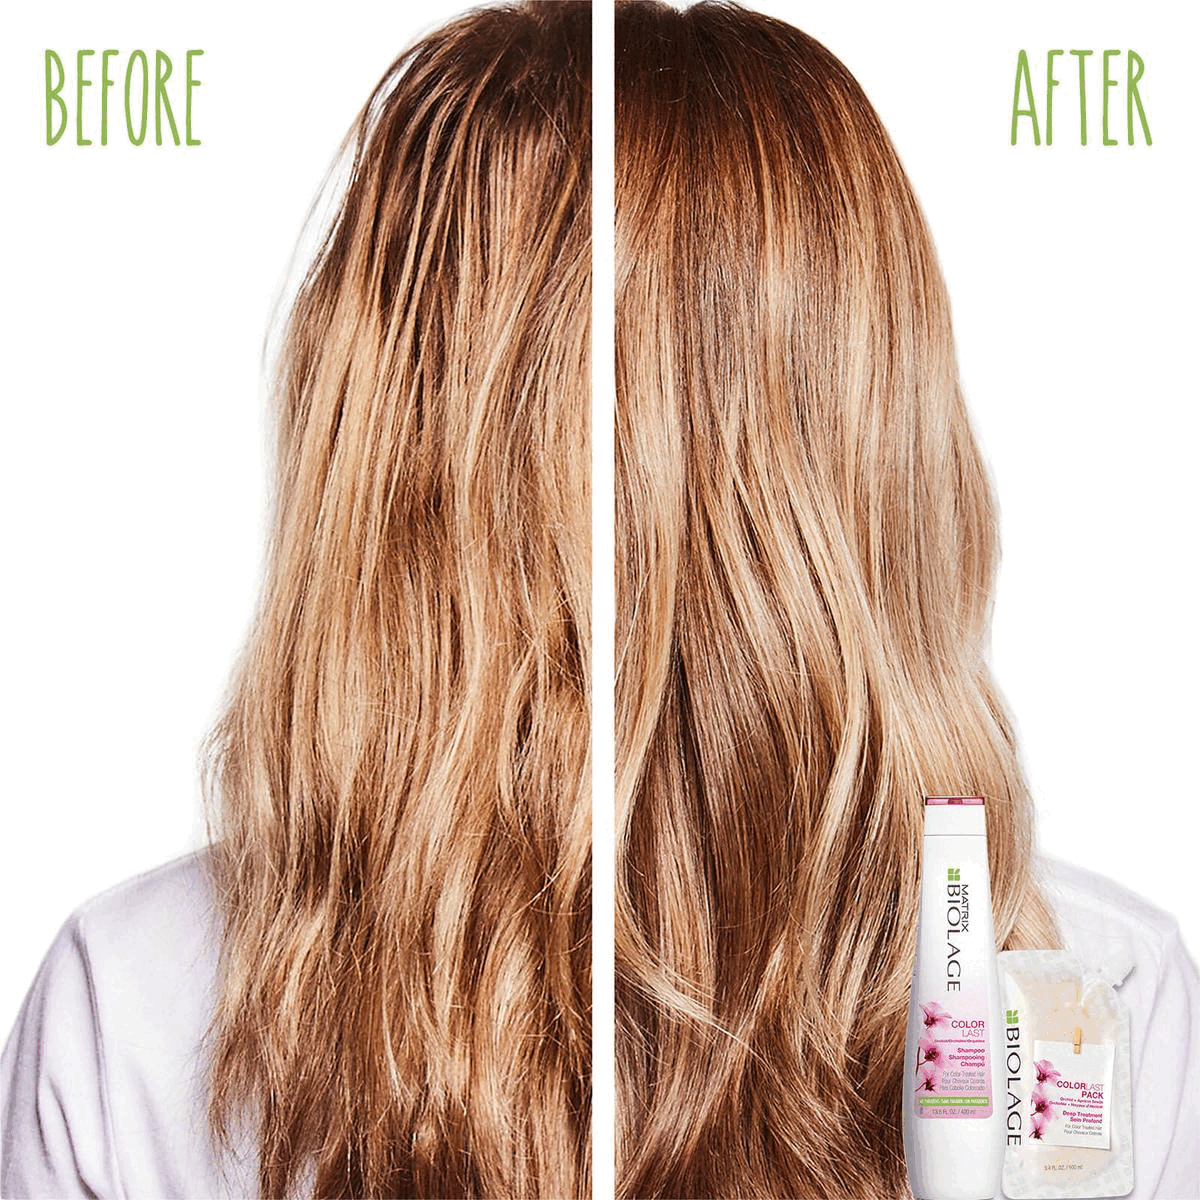 Before and after shot.Colorlast Deep Treatment and Colorlast Conditioner. Deep treatment Benefits. Paul Falltrick Global creative director advice on how to use the product